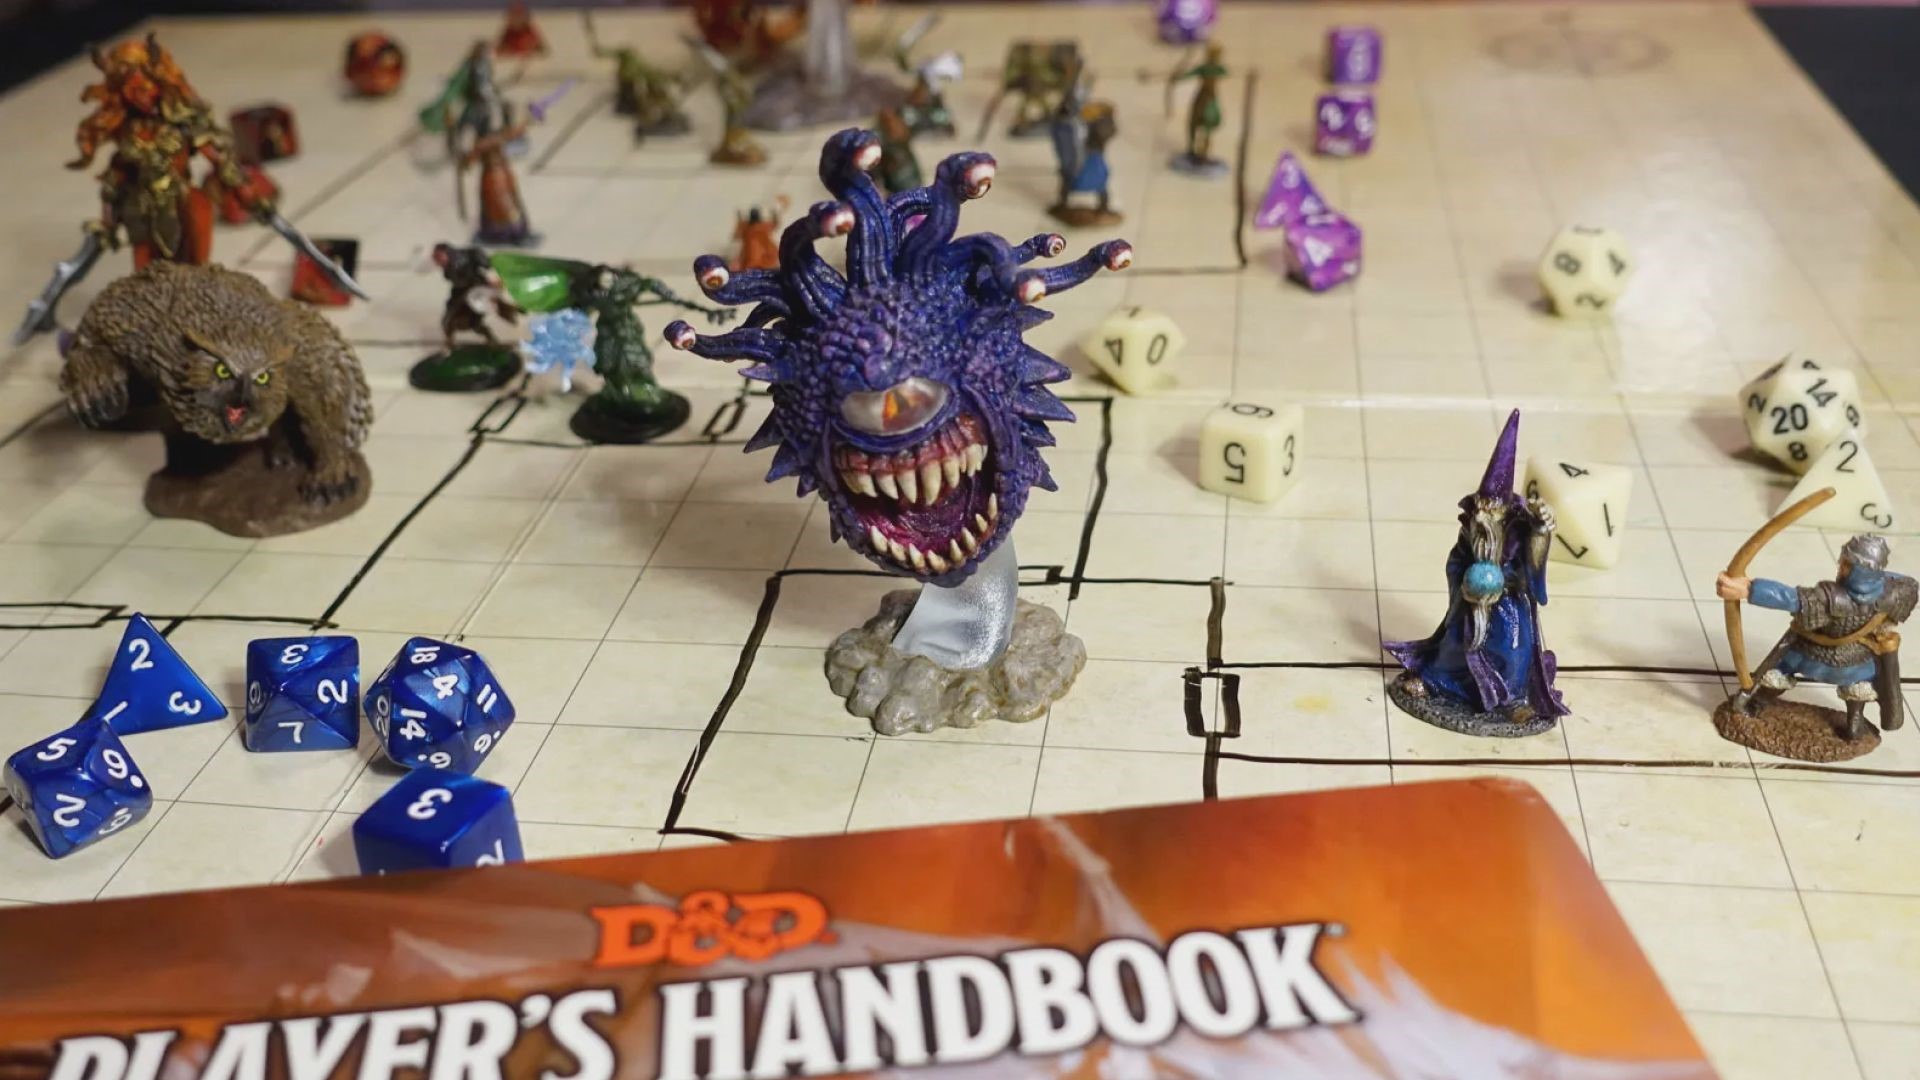 A look at how the current edition of Dungeons & Dragons has drawn in a new, more diverse fanbase, and the benefits that has brought to the community.